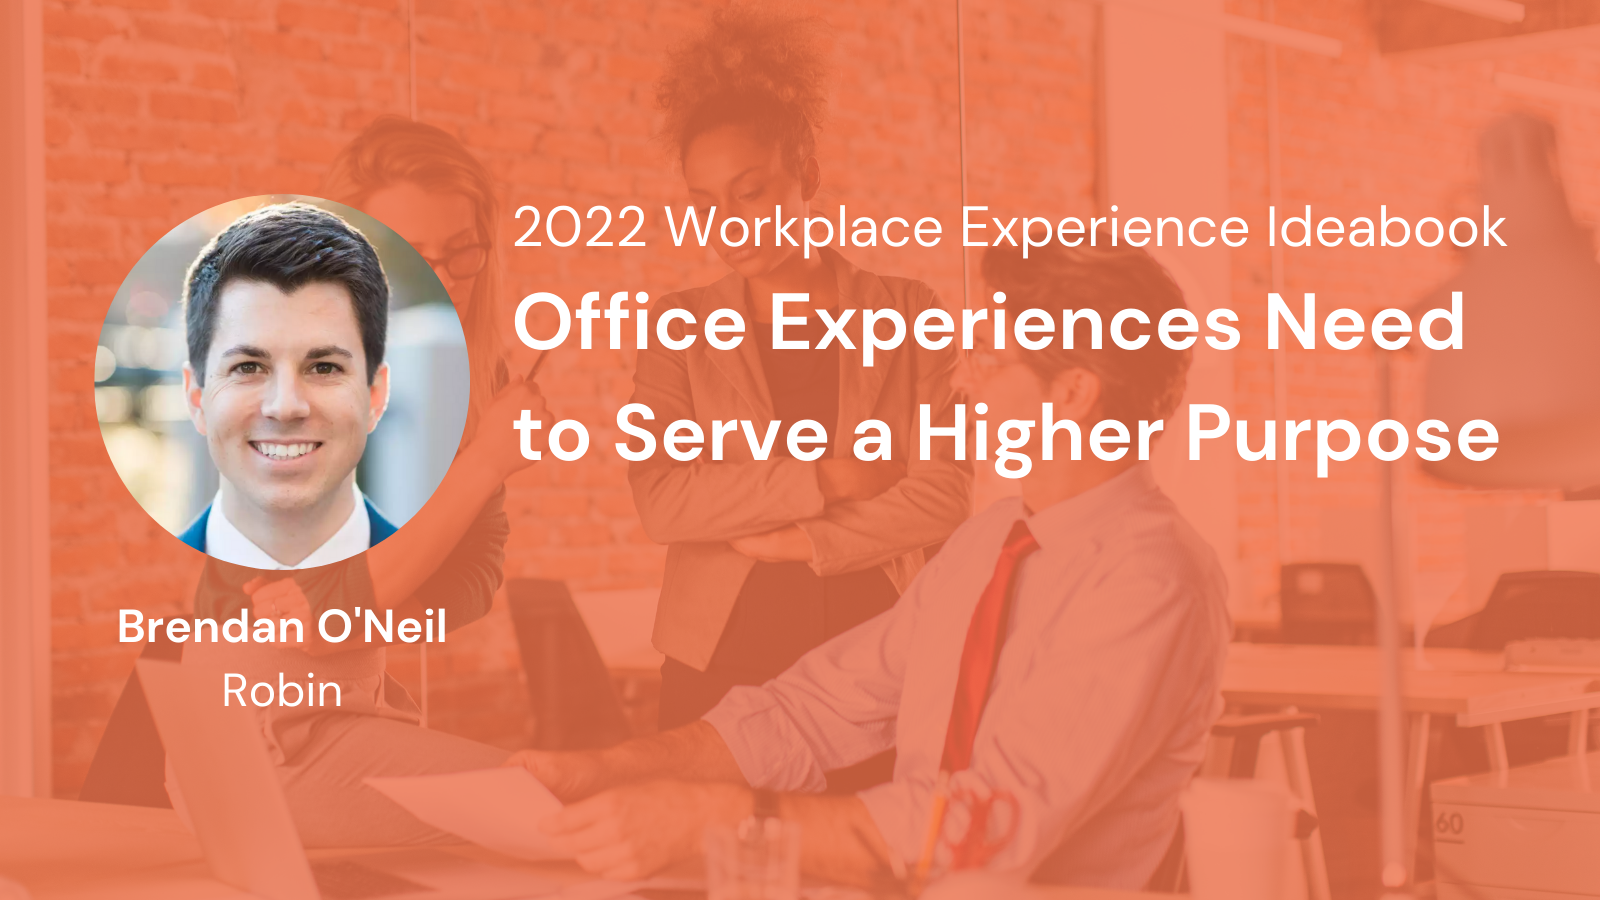 Office Experiences Need to Serve a Higher Purpose